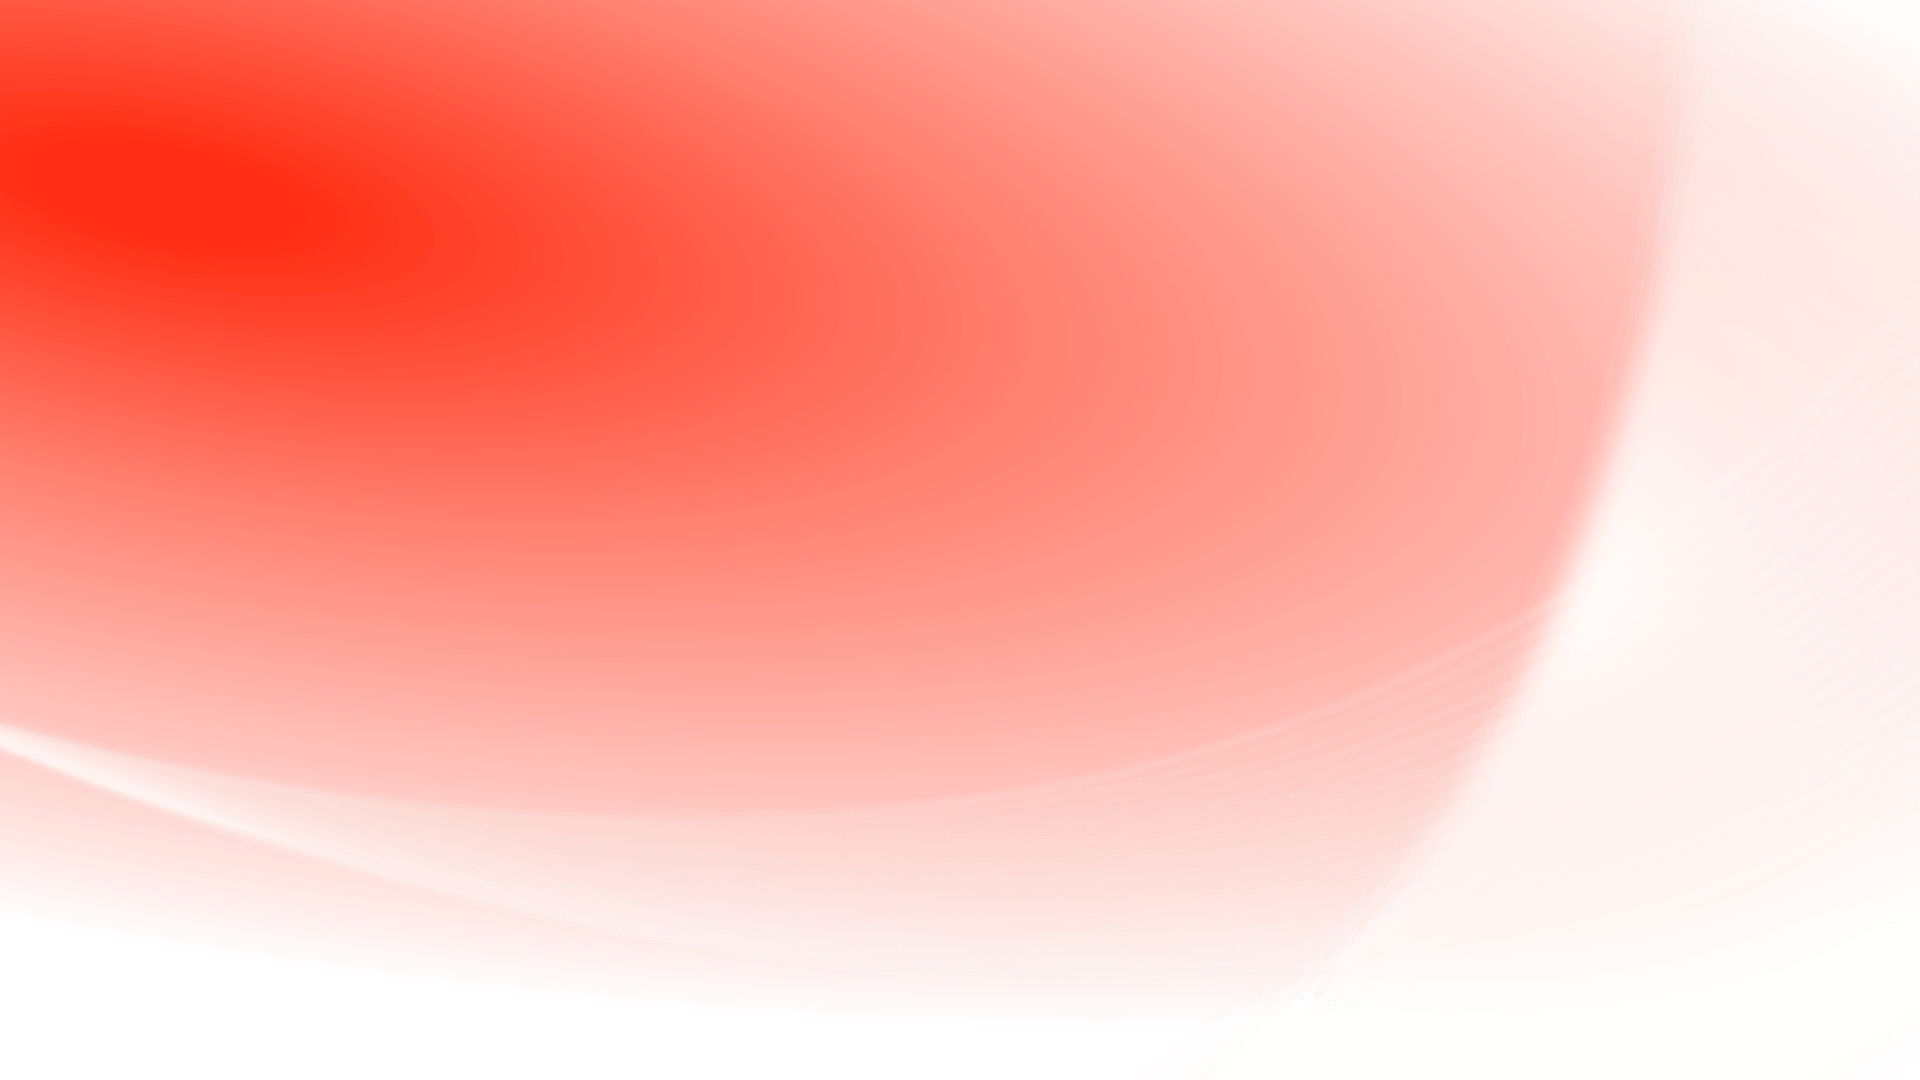 Set this reddish transparent waves image as CSS background